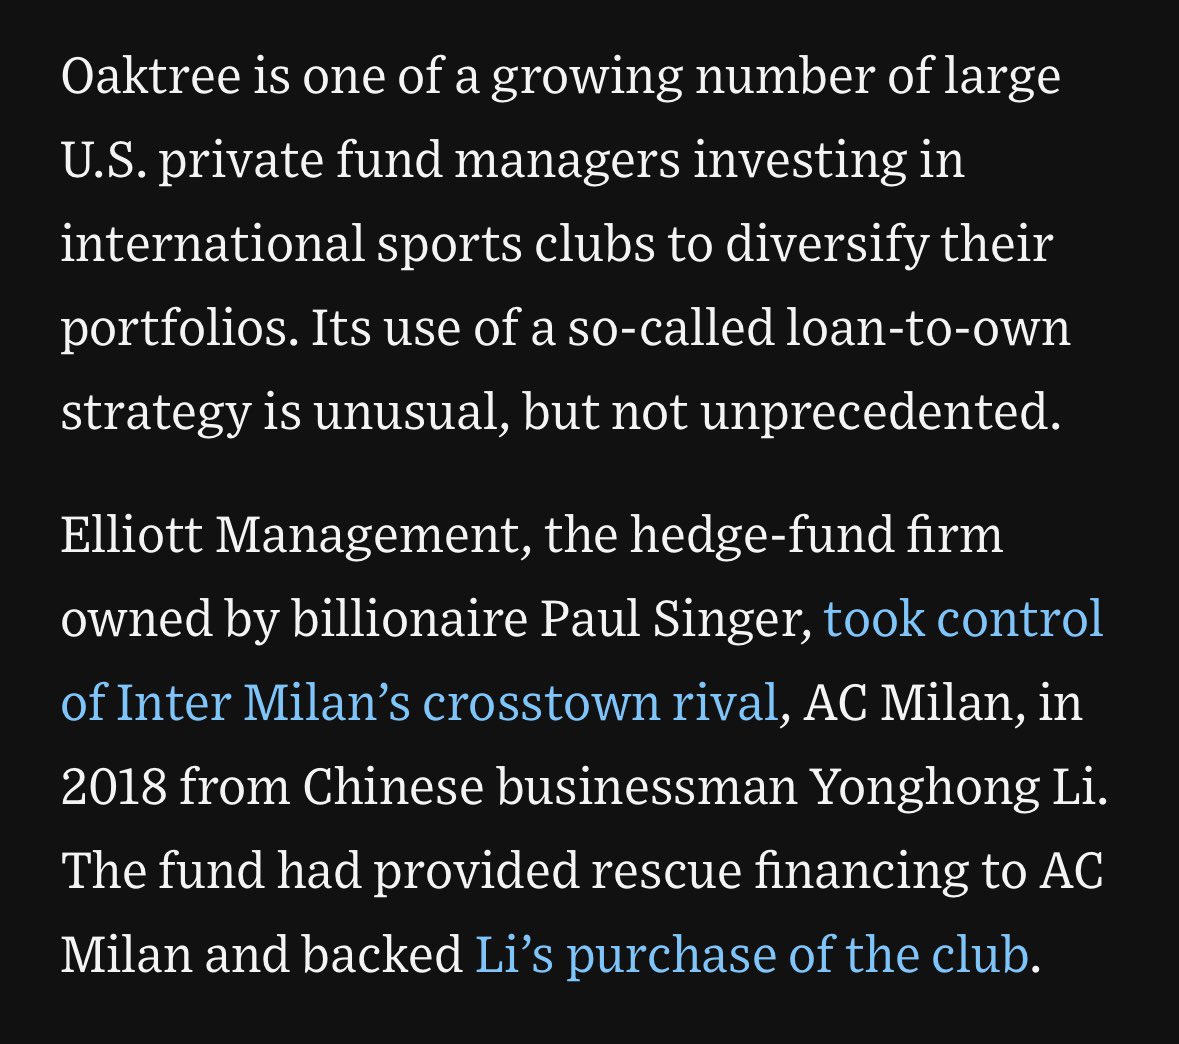 The “loan-to-own” strategy / Oaktree Capital Takes Control of Inter Milan, Italy’s Soccer Champions wsj.com/finance/invest…